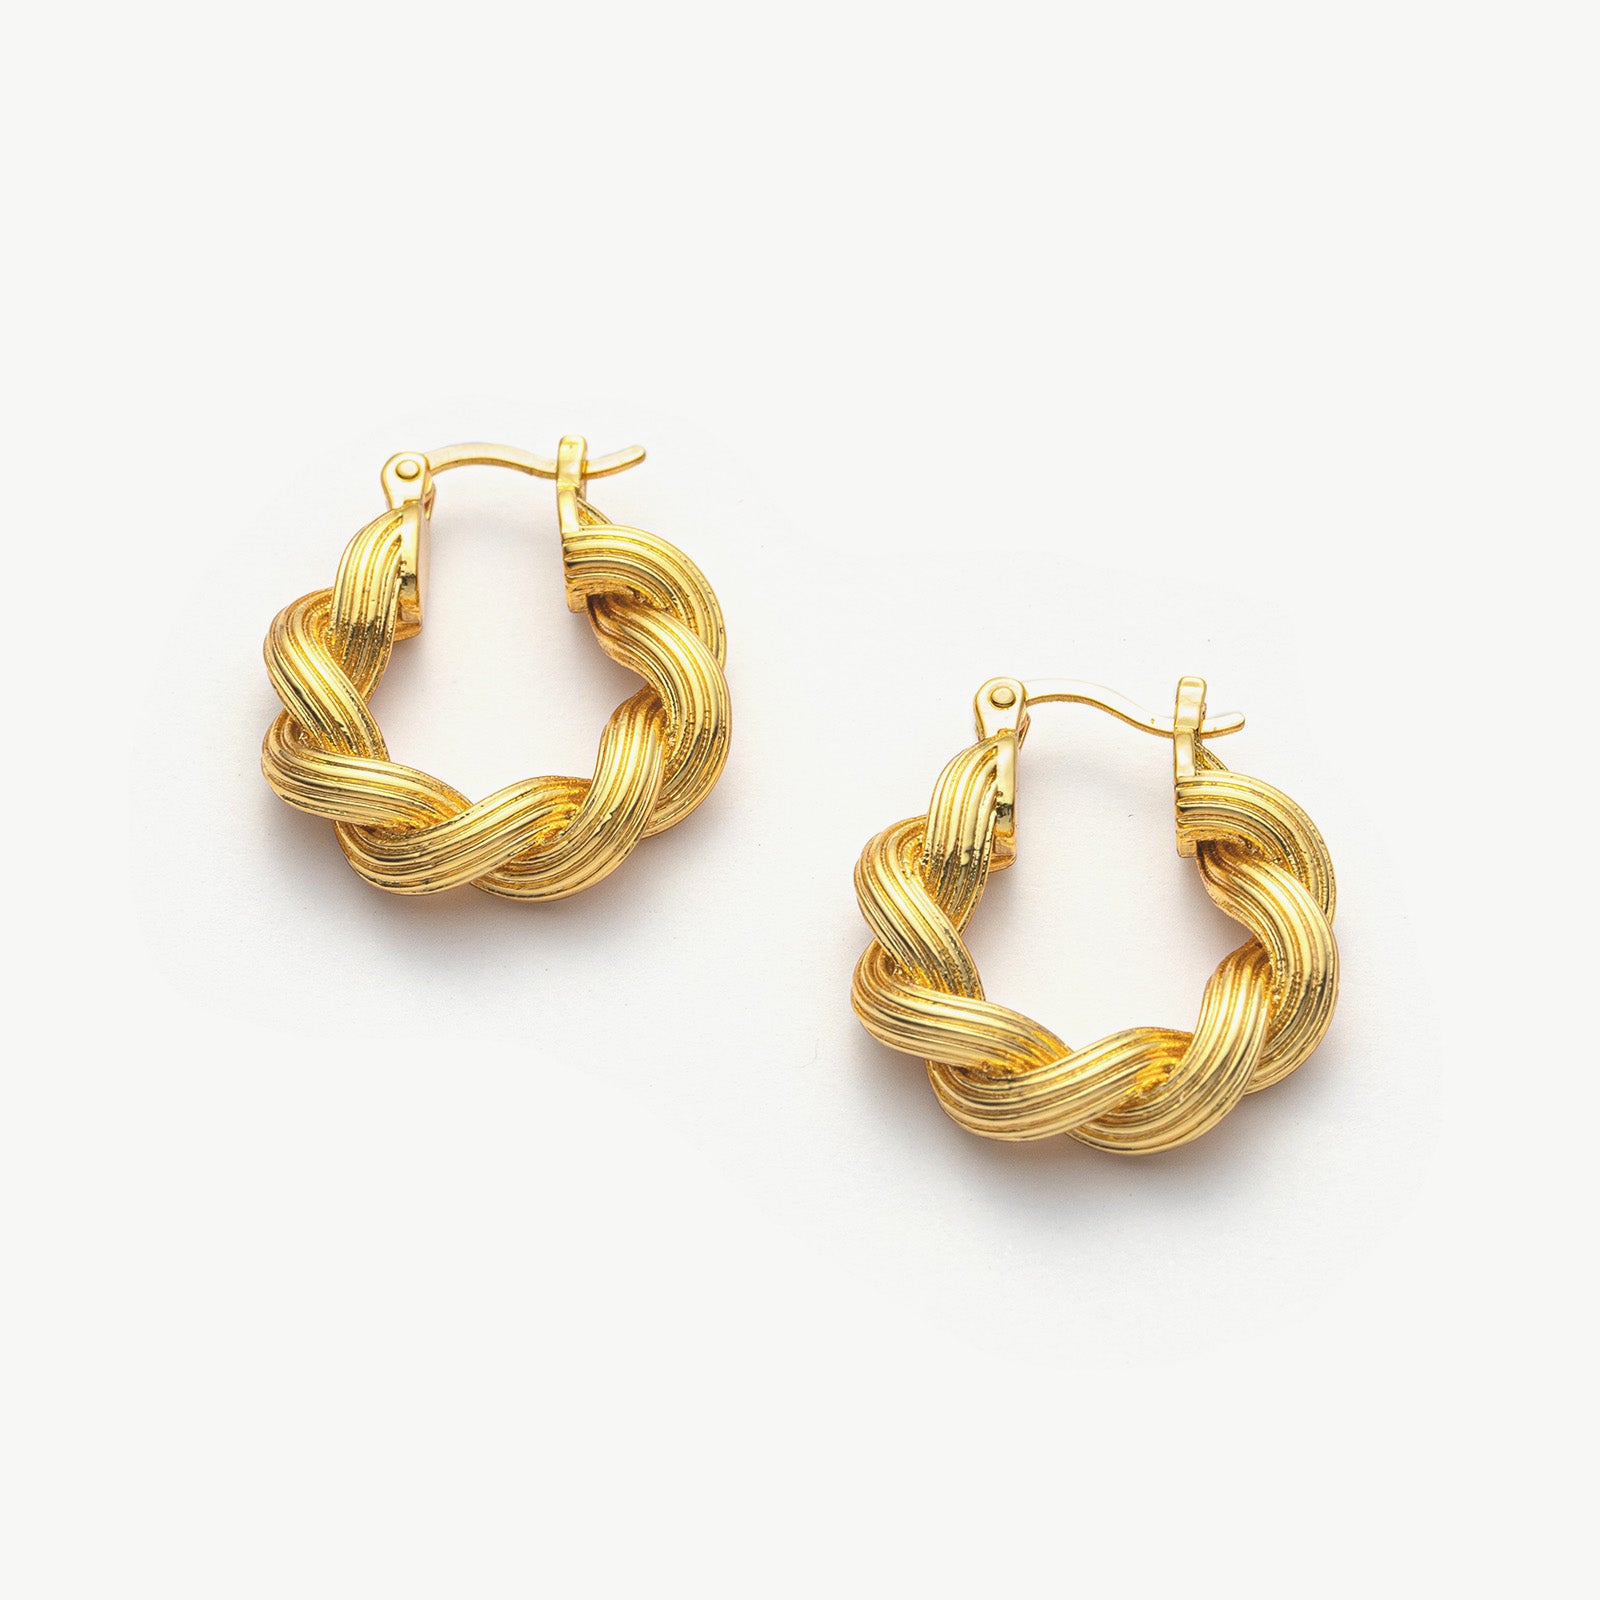 Double Rope Hoop Earrings making dynamic statements with their textured design, these hoops offer a stylish and eye-catching accessory for any occasion